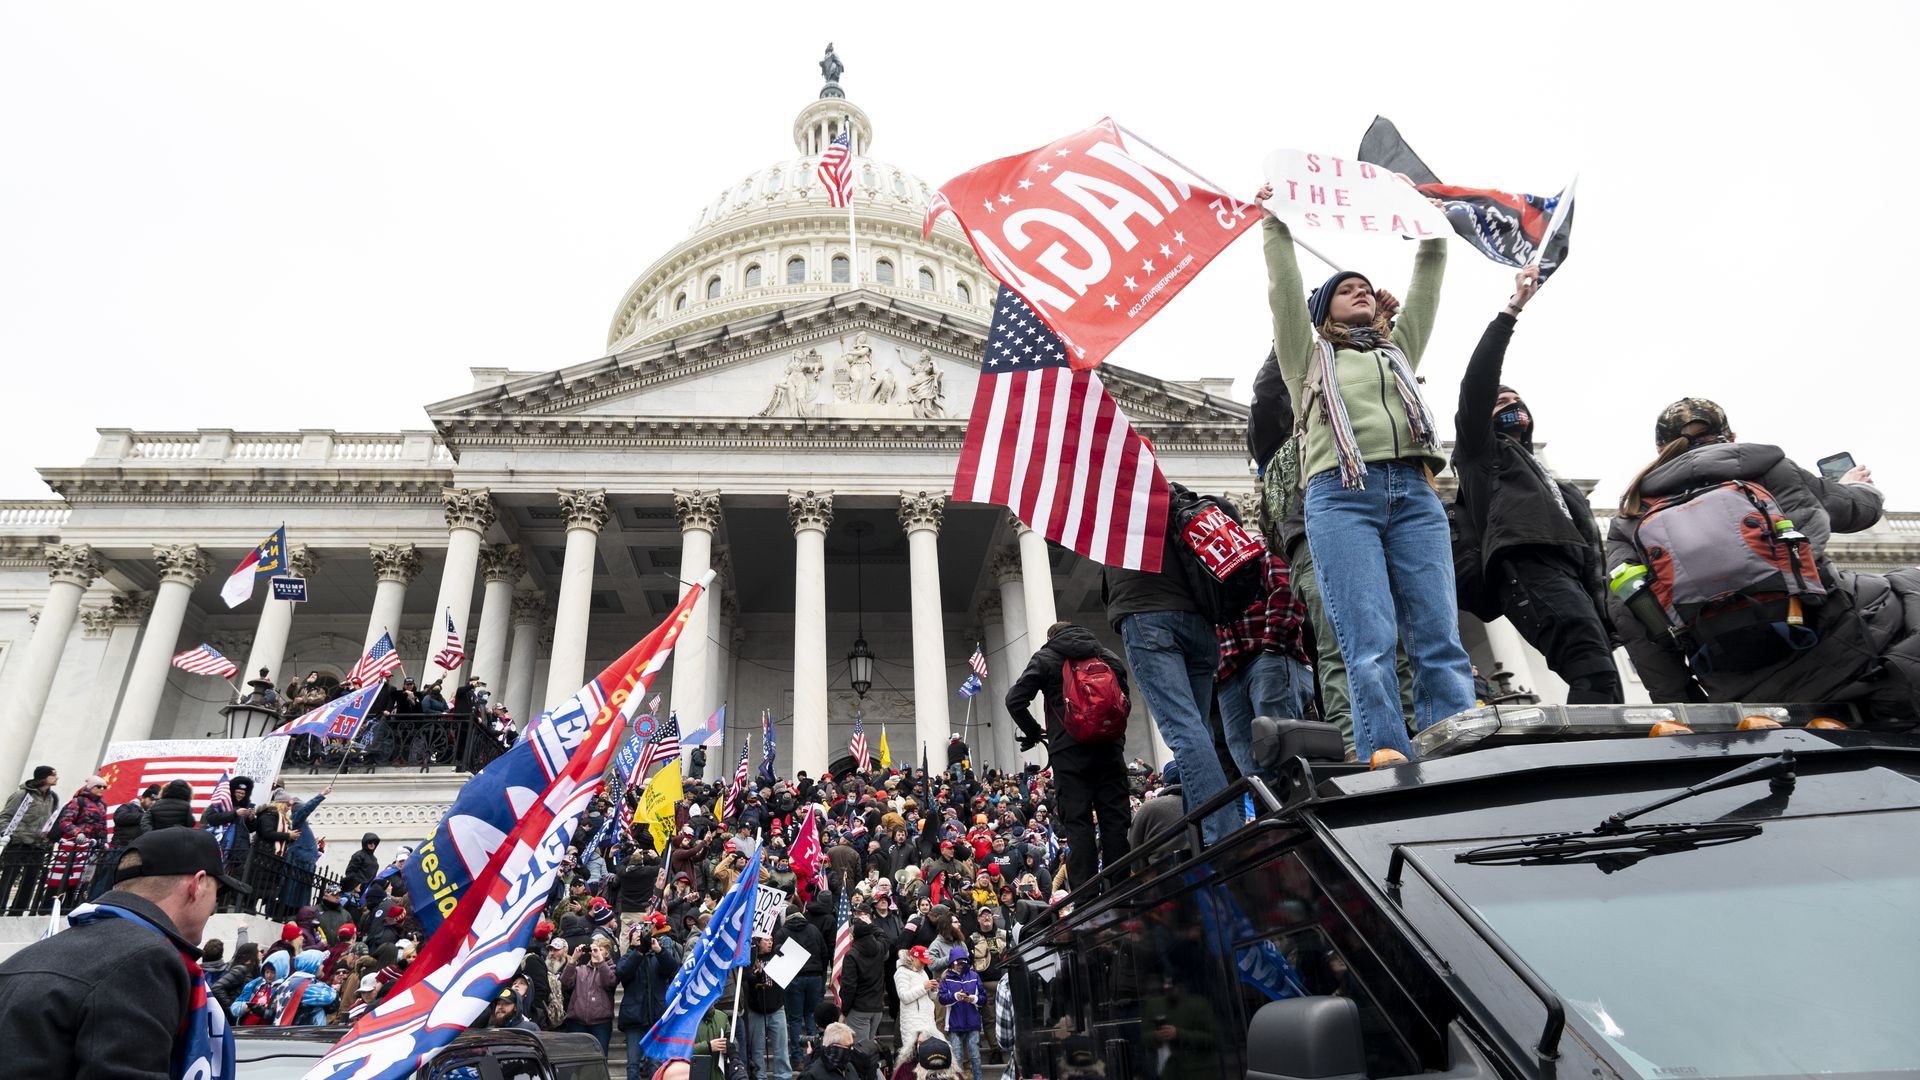 Trump supporters stand on a U.S. Capitol Police armored vehicle as others take over the steps of the Capitol